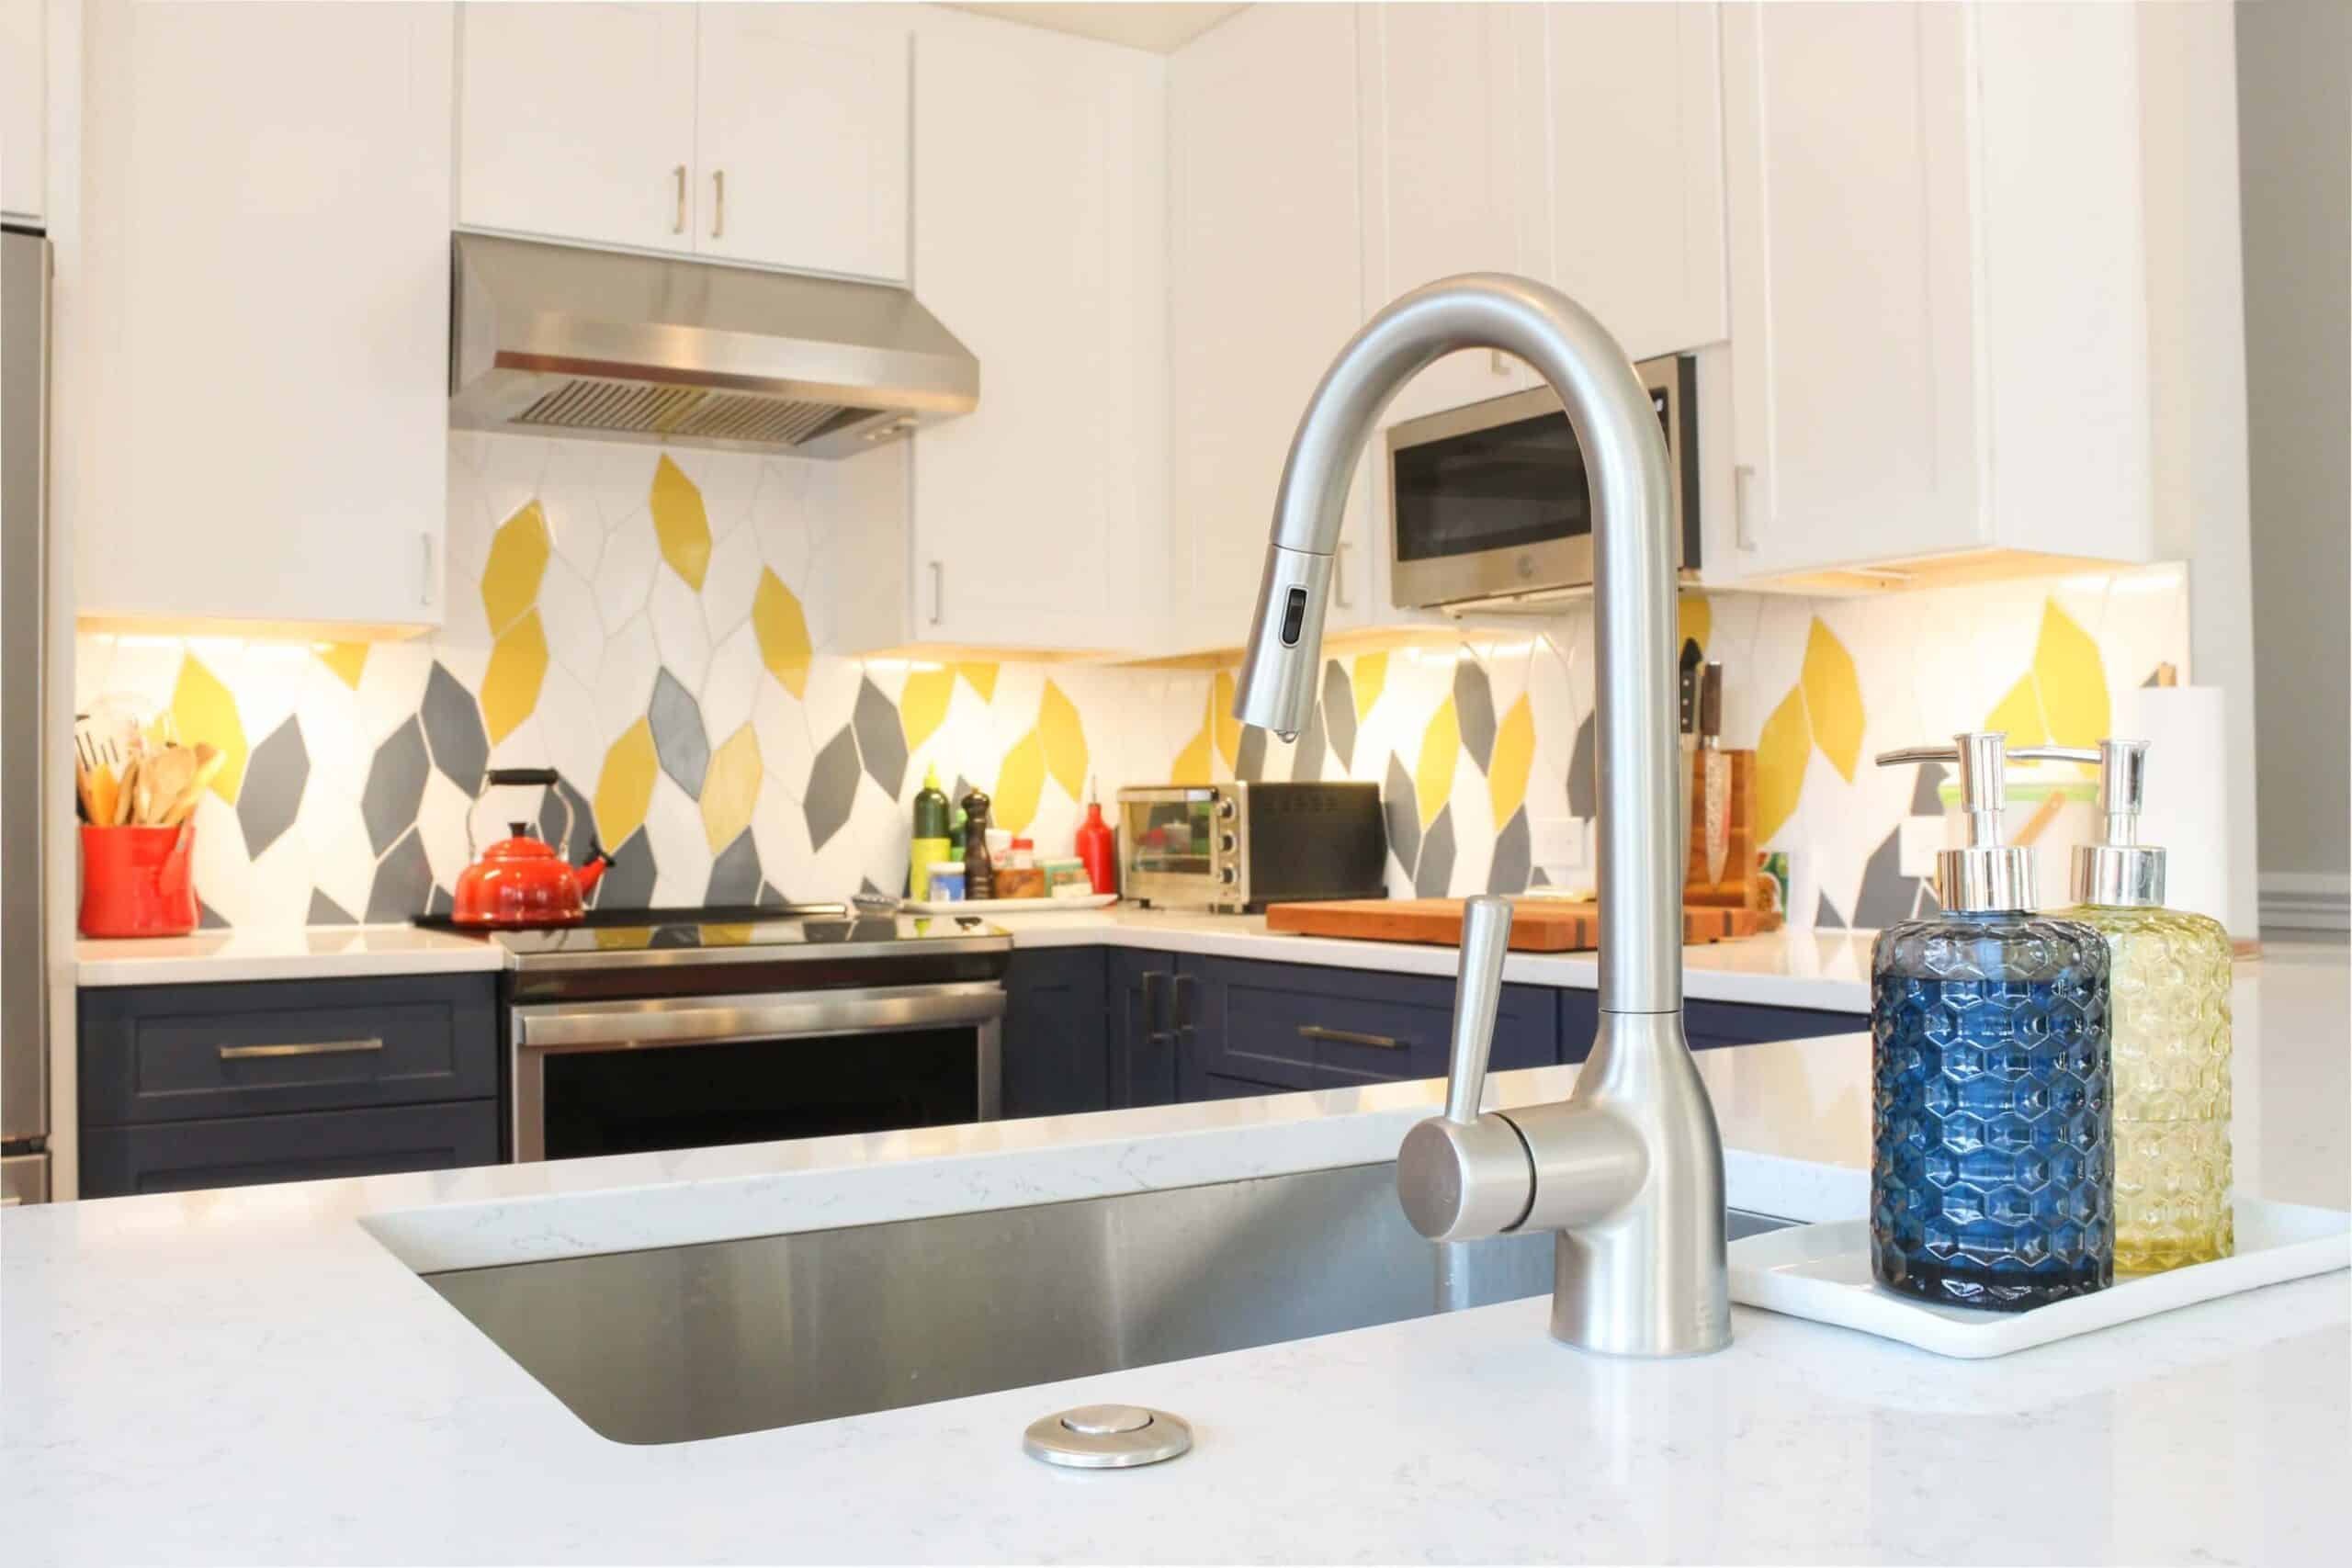 Fancy kitchen design with white and navy blue cabinets, and white countertop